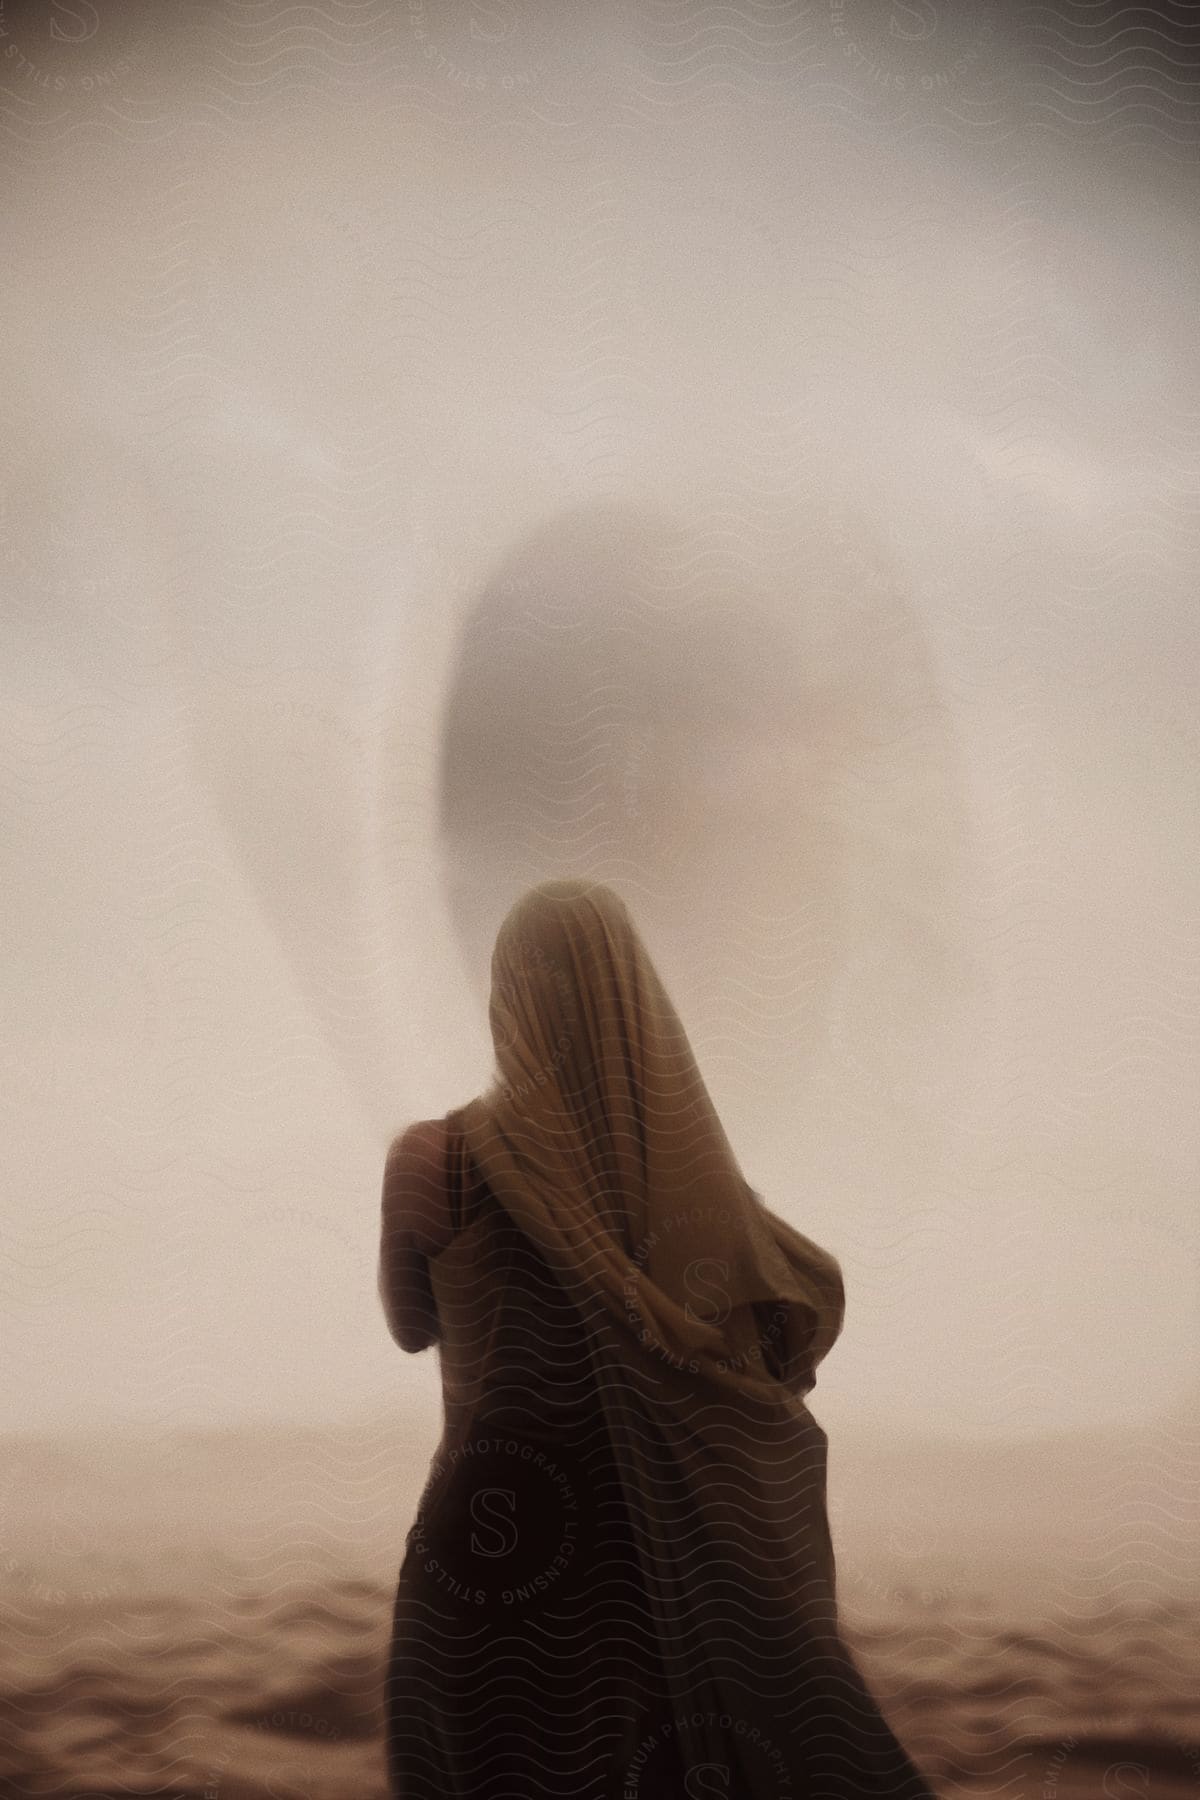 A person is facing away from them and wearing a long brown dress and looking forward in an environment with sand on the ground and a lot of fog